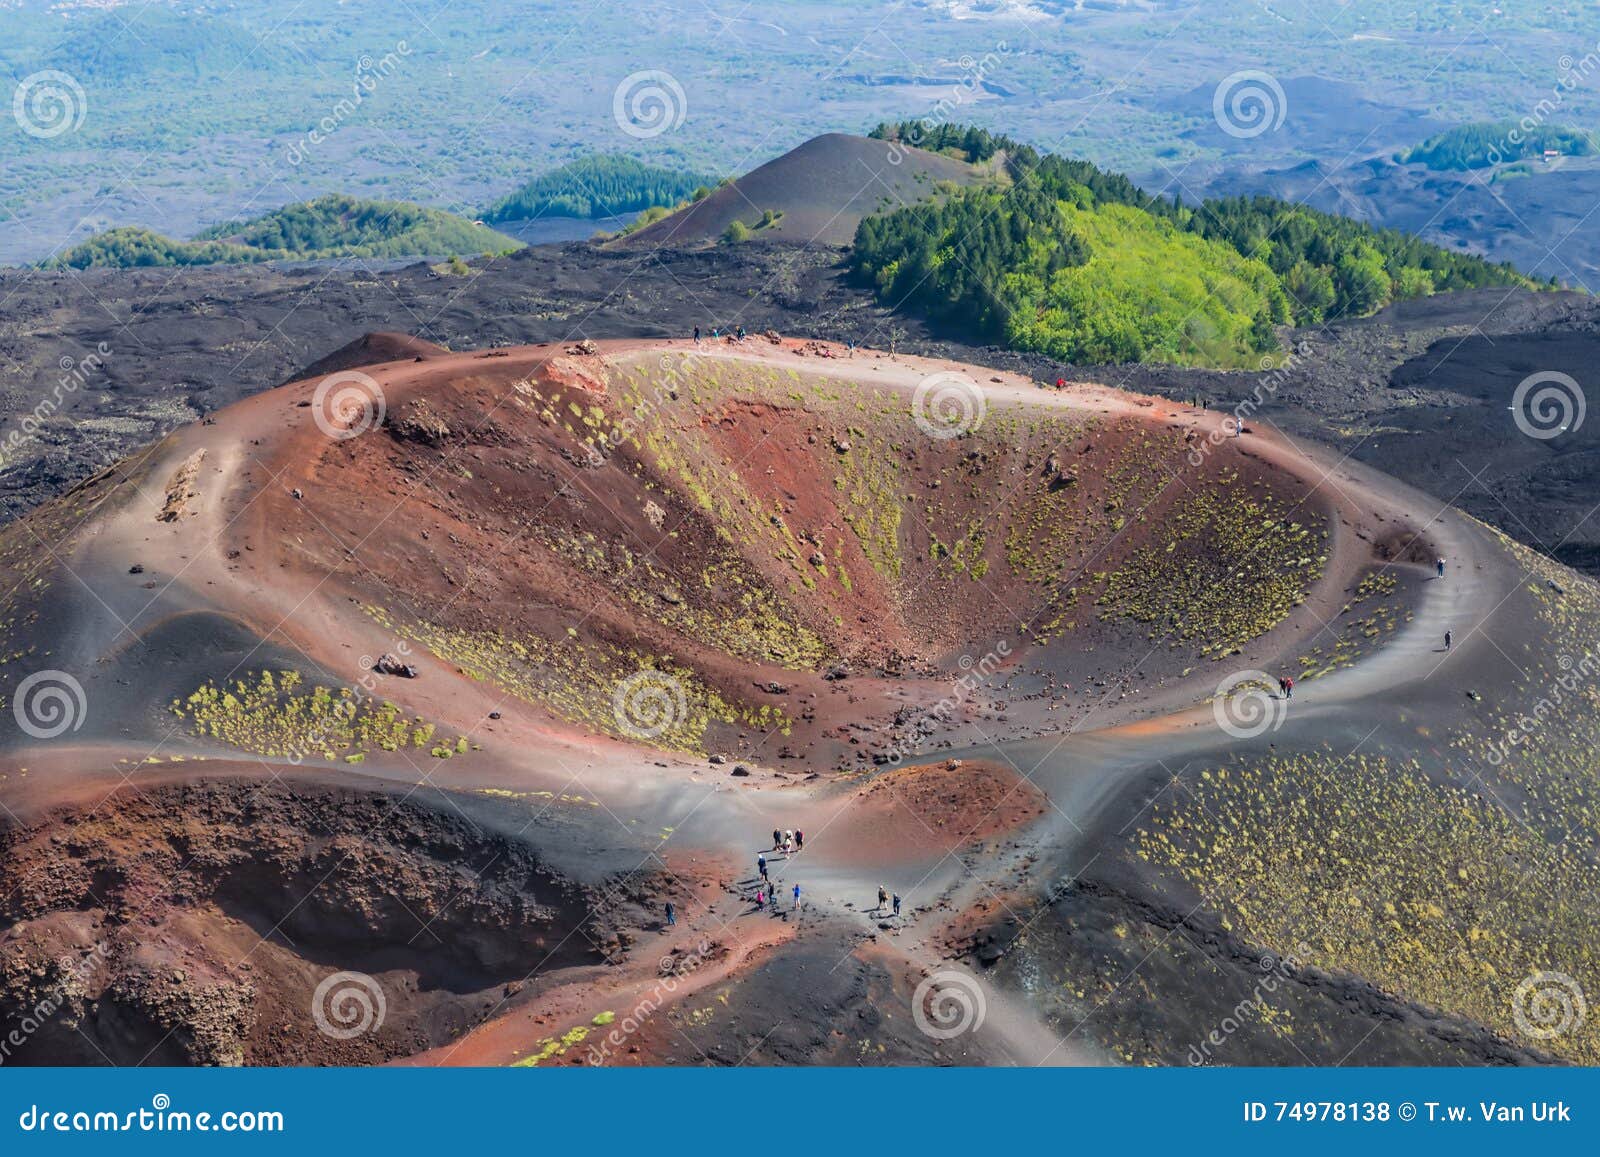 silvestri crater at the slopes of mount etna at the island sicily, italy